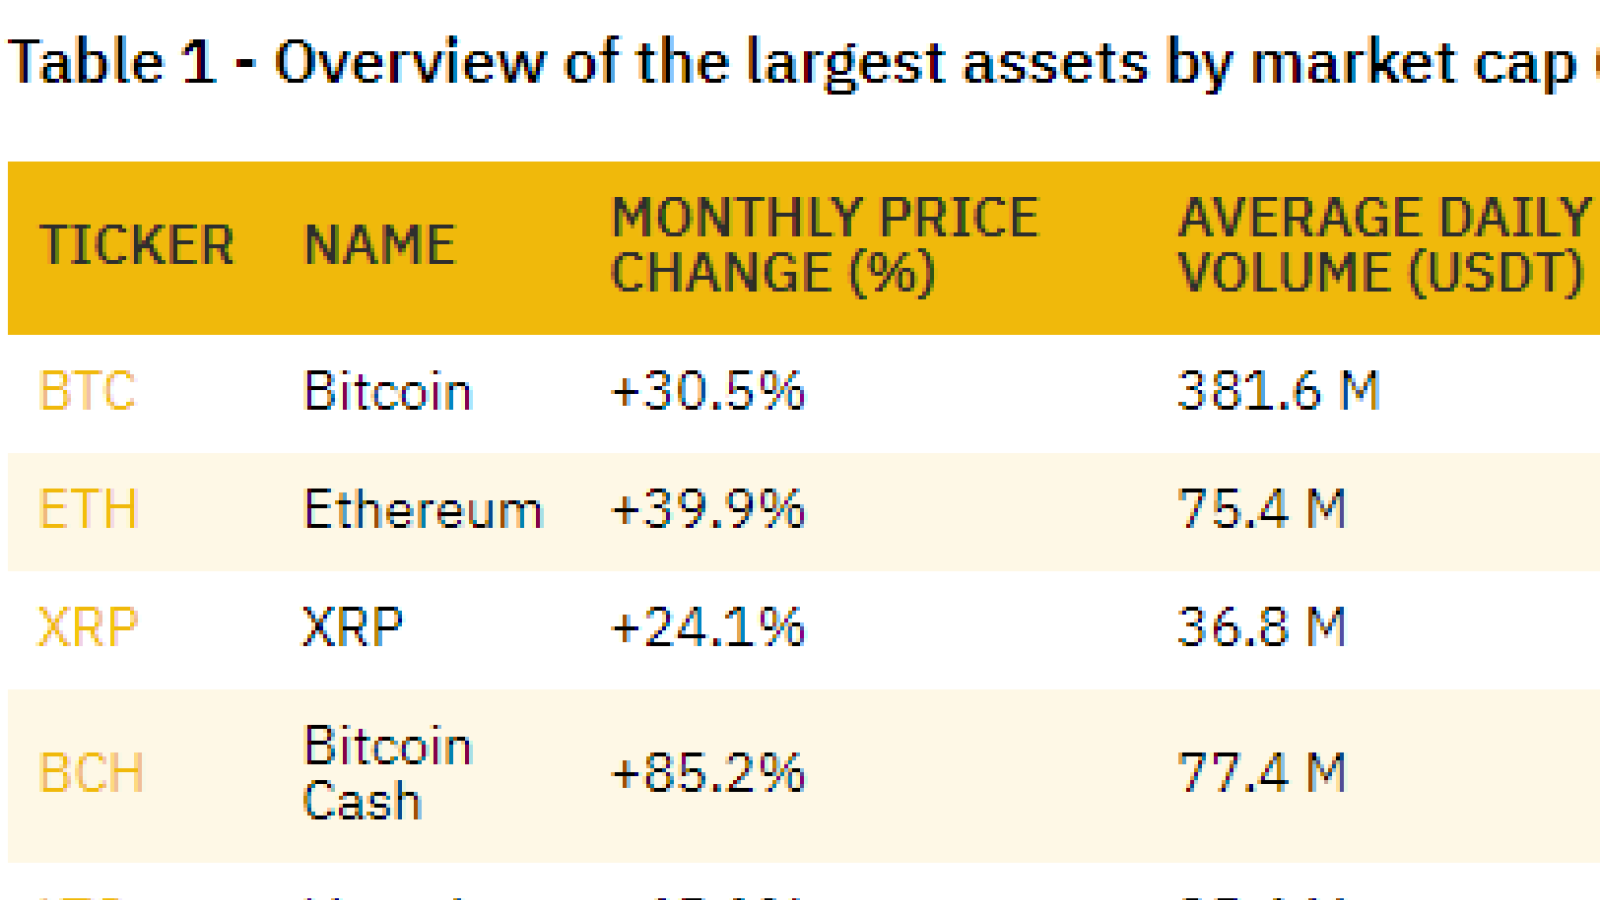 All top altcoins show double-digit gains in January 2020.